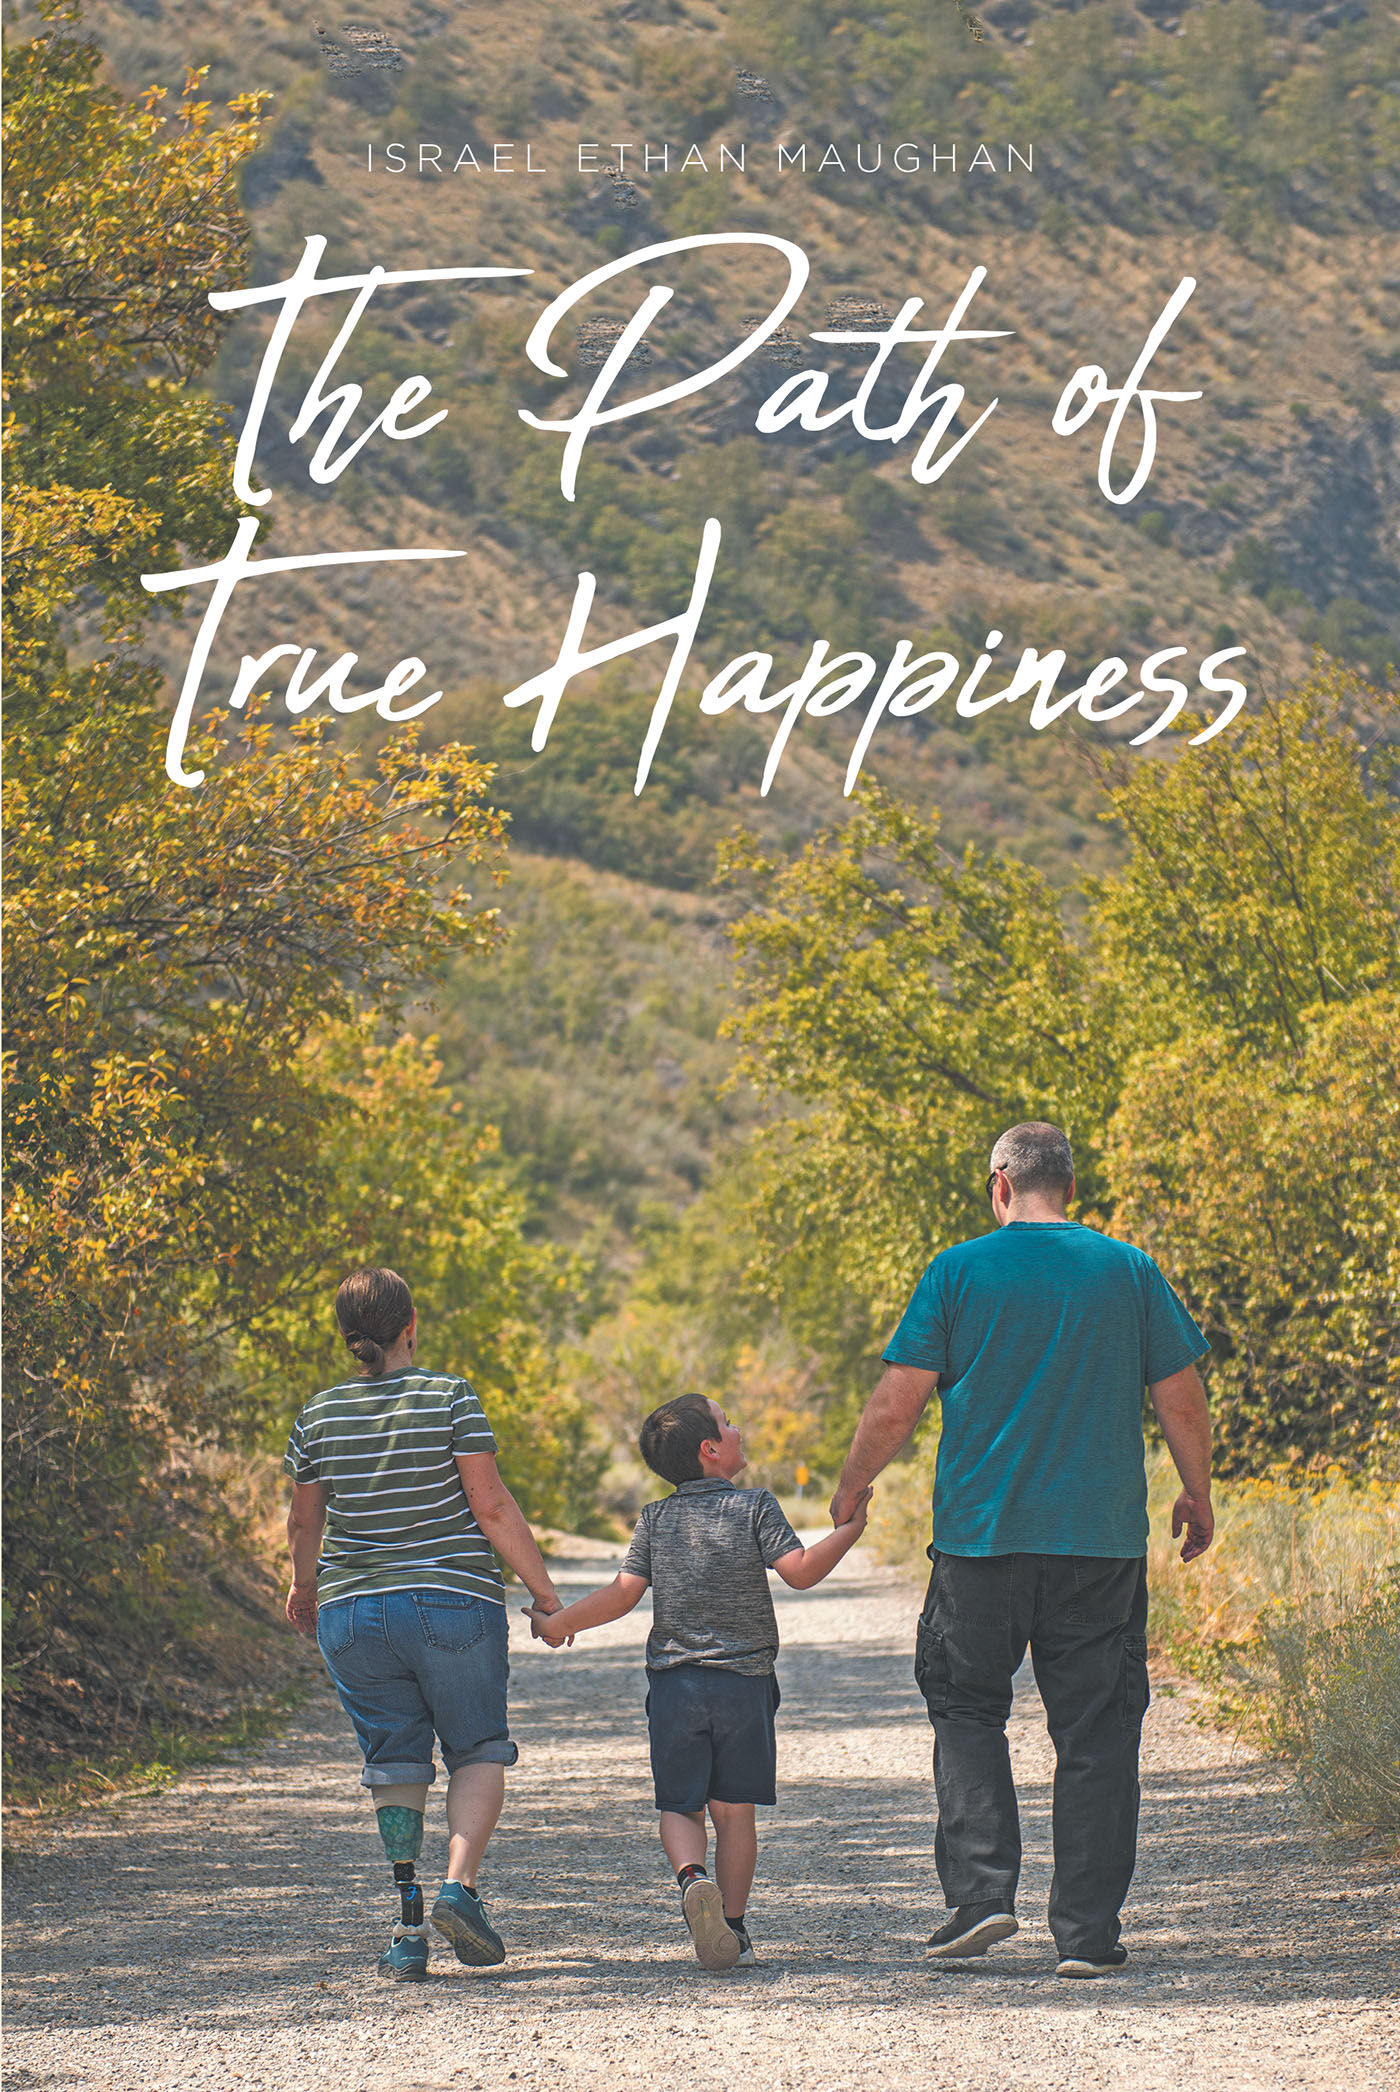 Author Israel Ethan Maughan’s New Book, "The Path of True Happiness," is an Empowering and Thought-Provoking Guide to Discovering One's Joy and Success in Its Truest Form